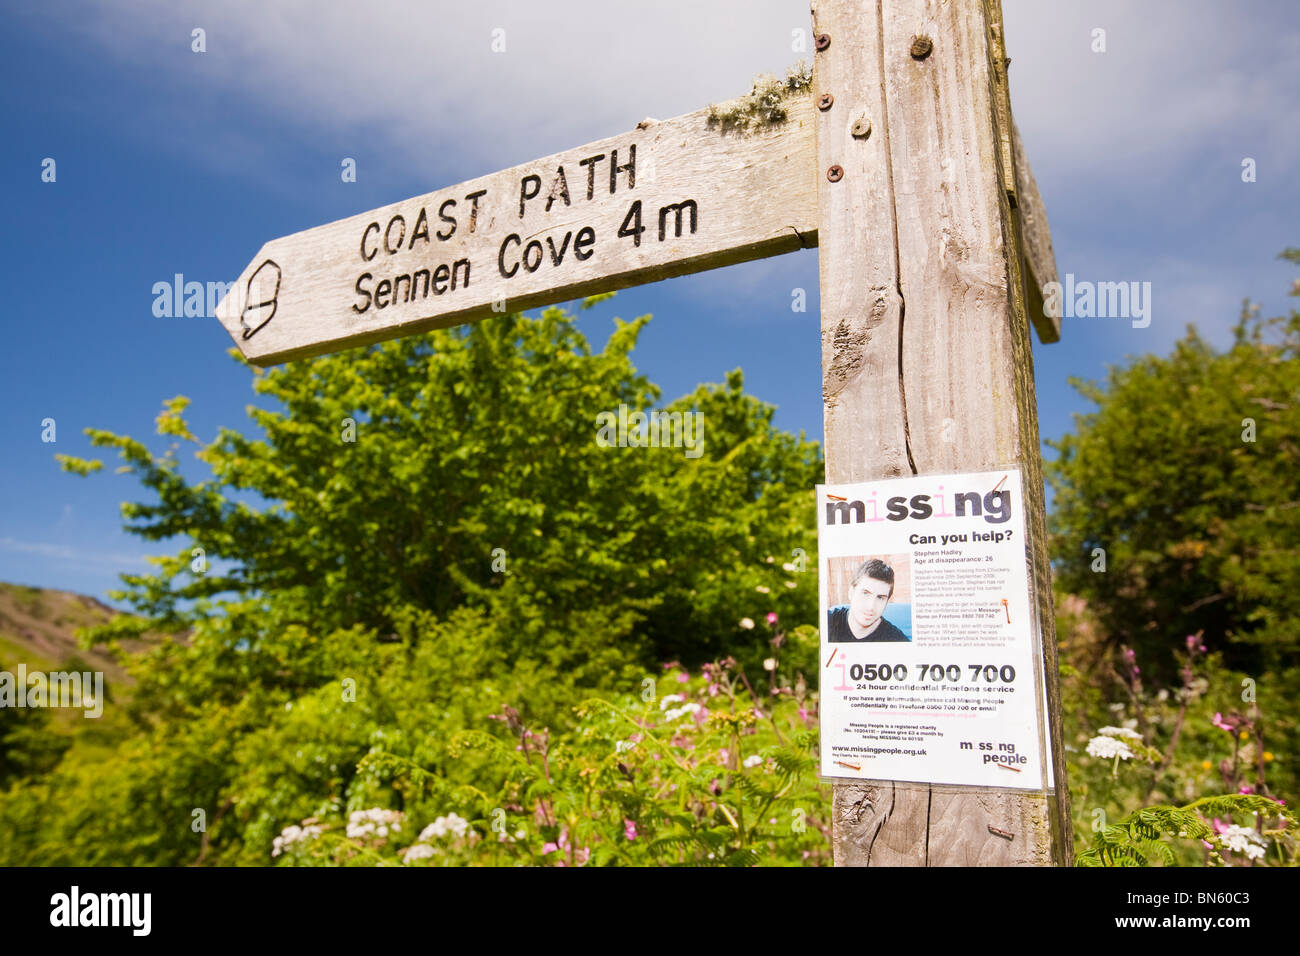 A poster about a missing person on a footpath sign post in St Just, Cornwall, UK. Stock Photo